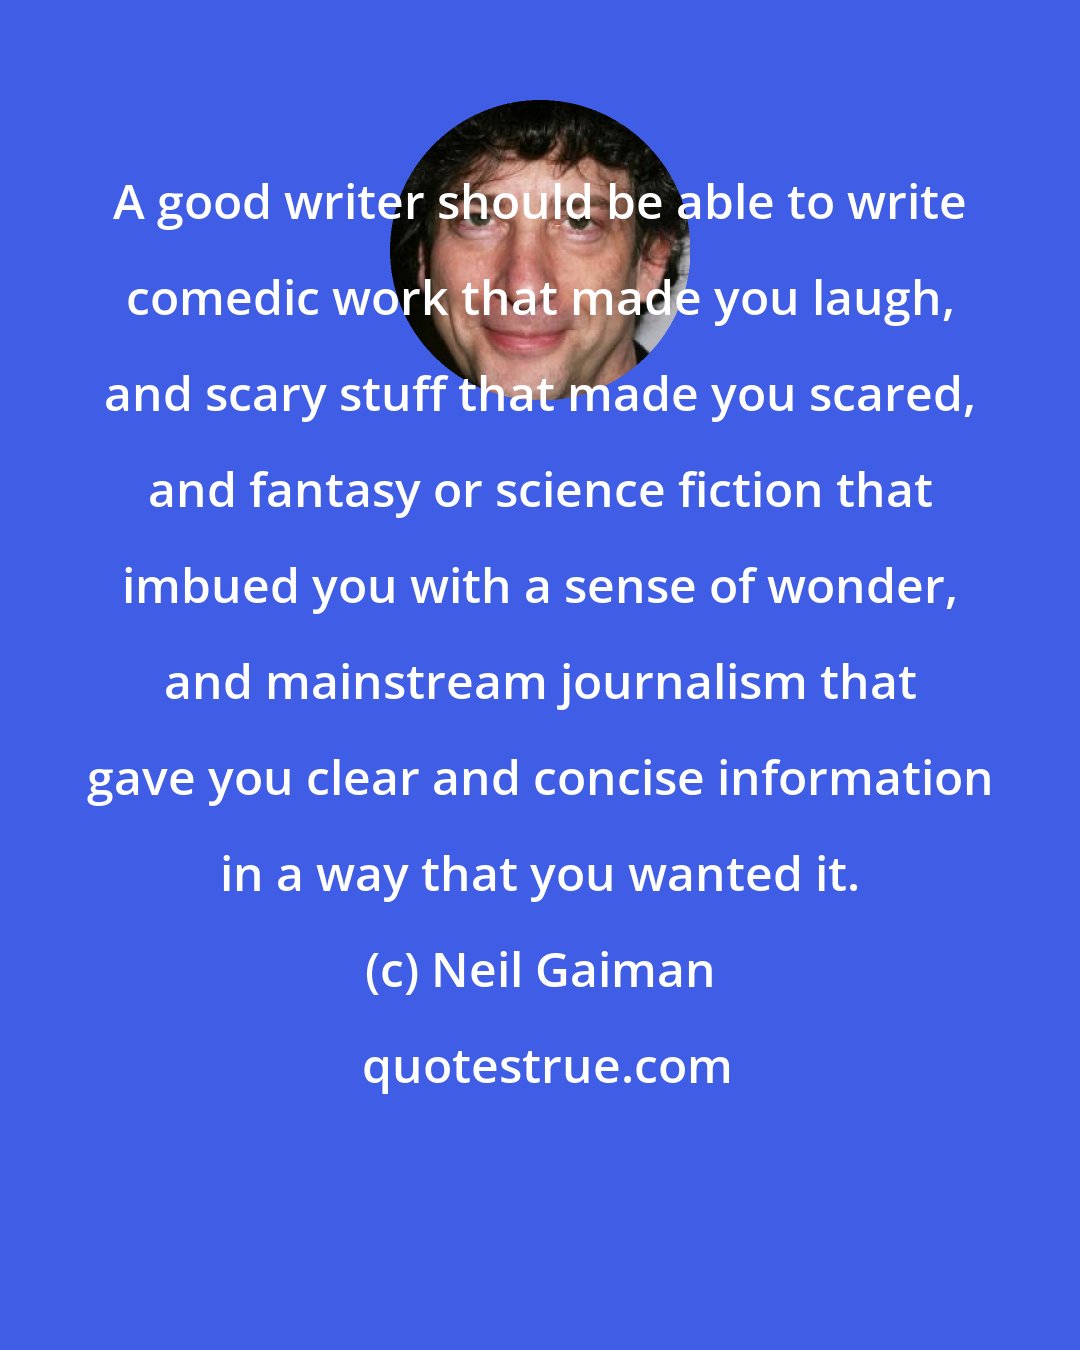 Neil Gaiman: A good writer should be able to write comedic work that made you laugh, and scary stuff that made you scared, and fantasy or science fiction that imbued you with a sense of wonder, and mainstream journalism that gave you clear and concise information in a way that you wanted it.